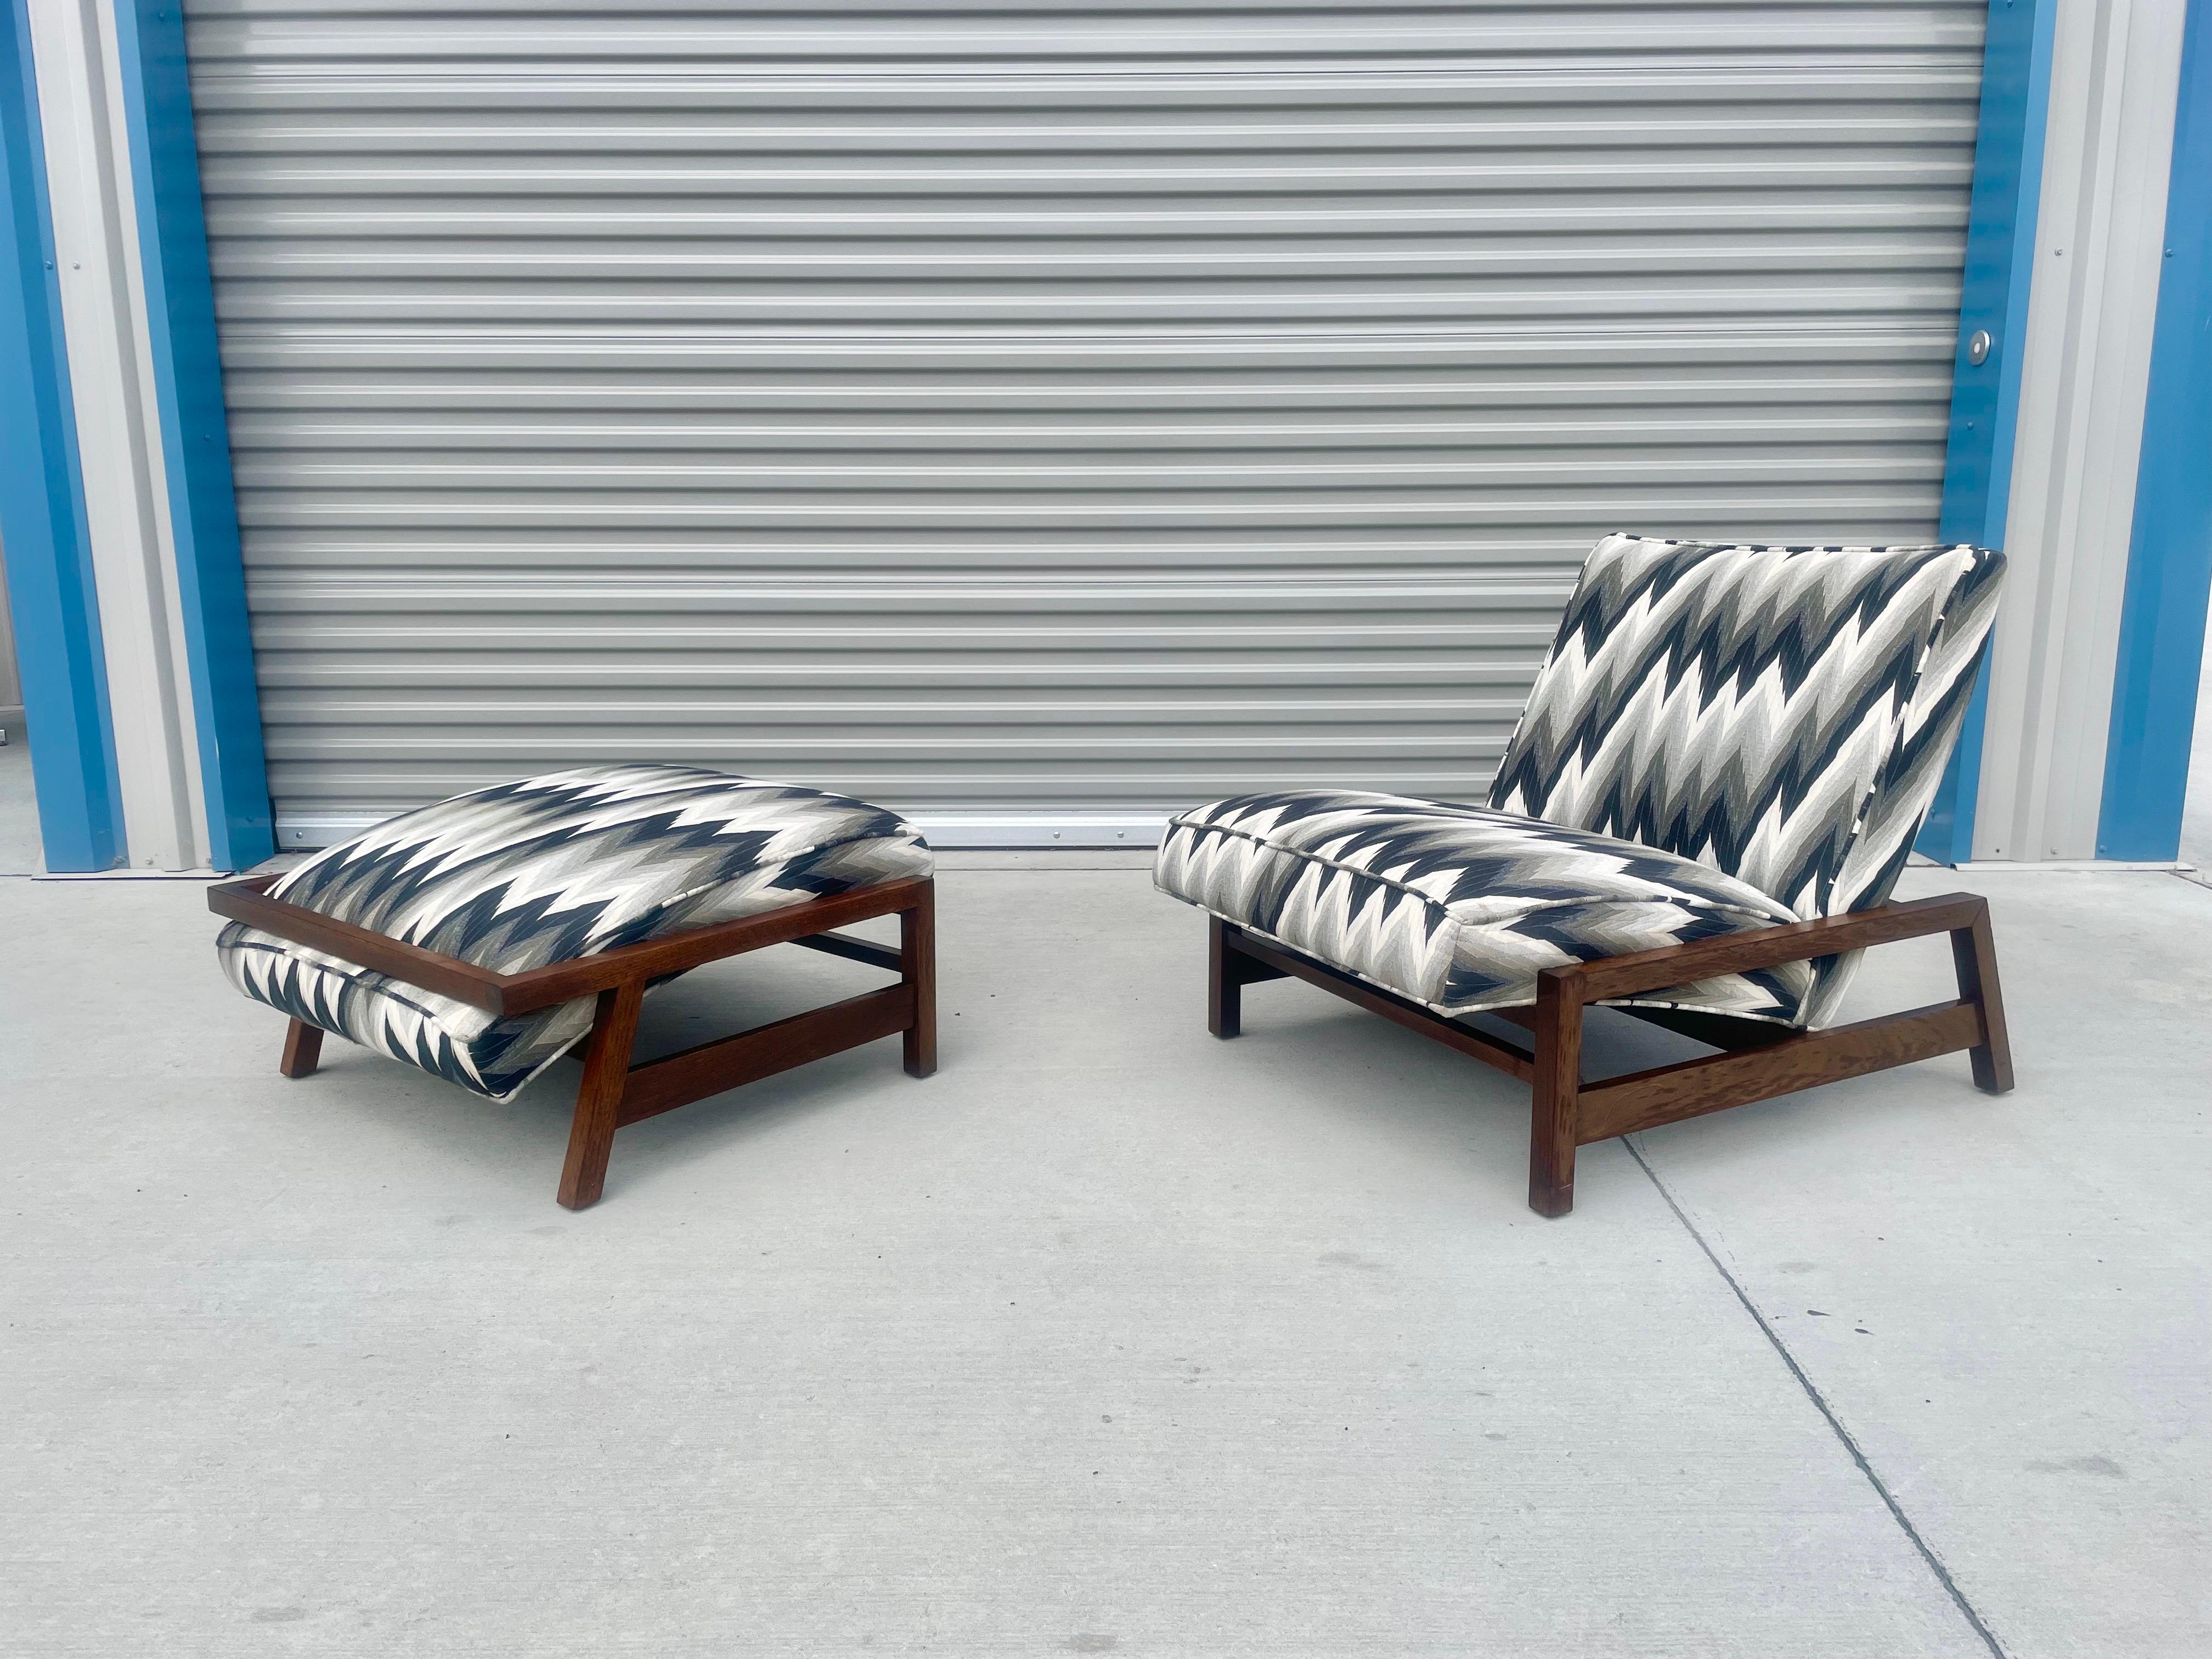 Vintage walnut lounge chair and ottoman in the style of Tobia Scarpa. This beautiful vintage chair and ottoman come with a unique rectangles walnut frame with a white and black upholstery pattern. The fabric is in good shape since it was previously